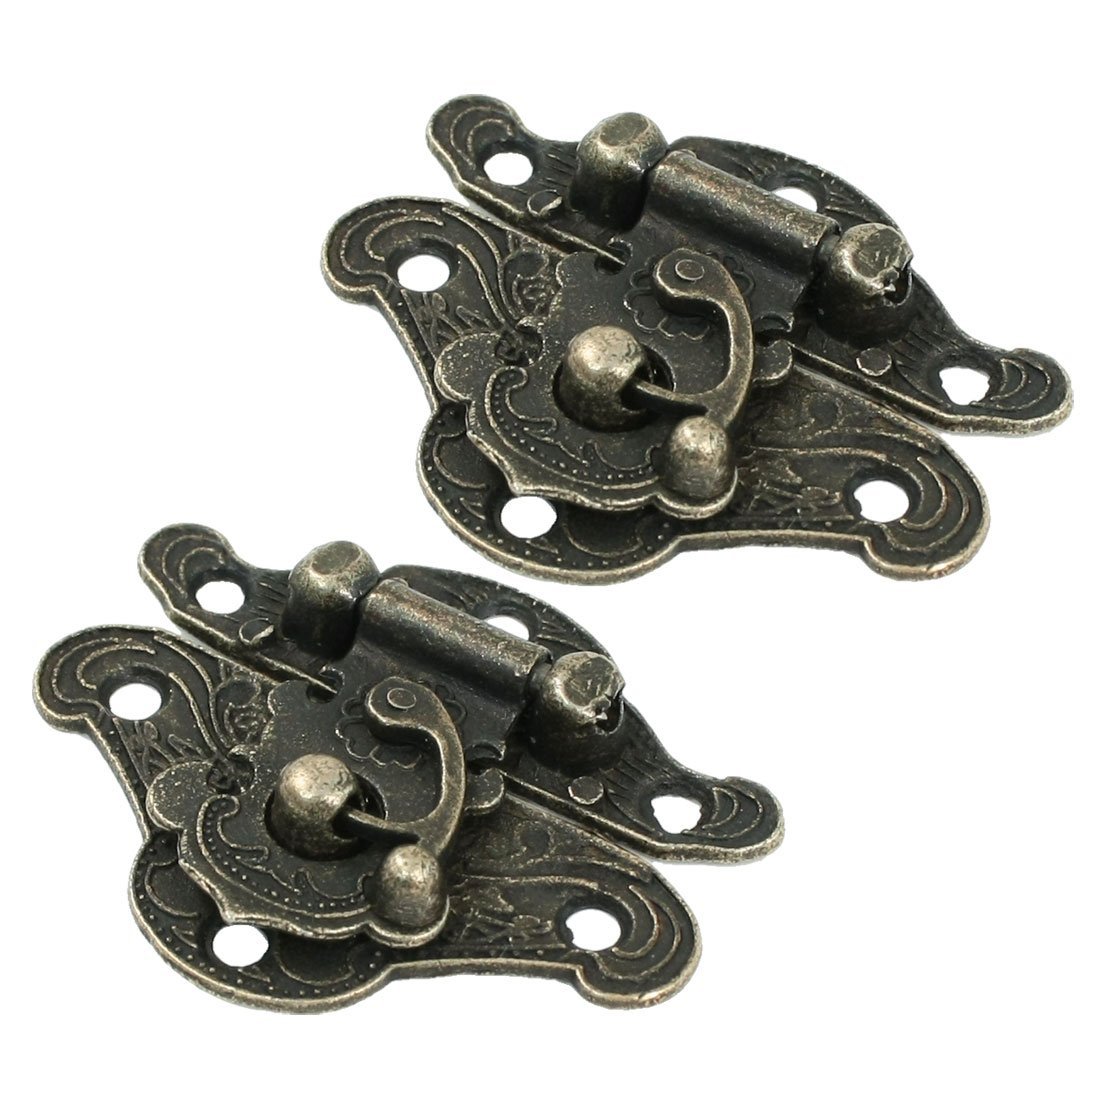 2 PACK ANTIQUE STYLE BRONZE FINISH LATCHES